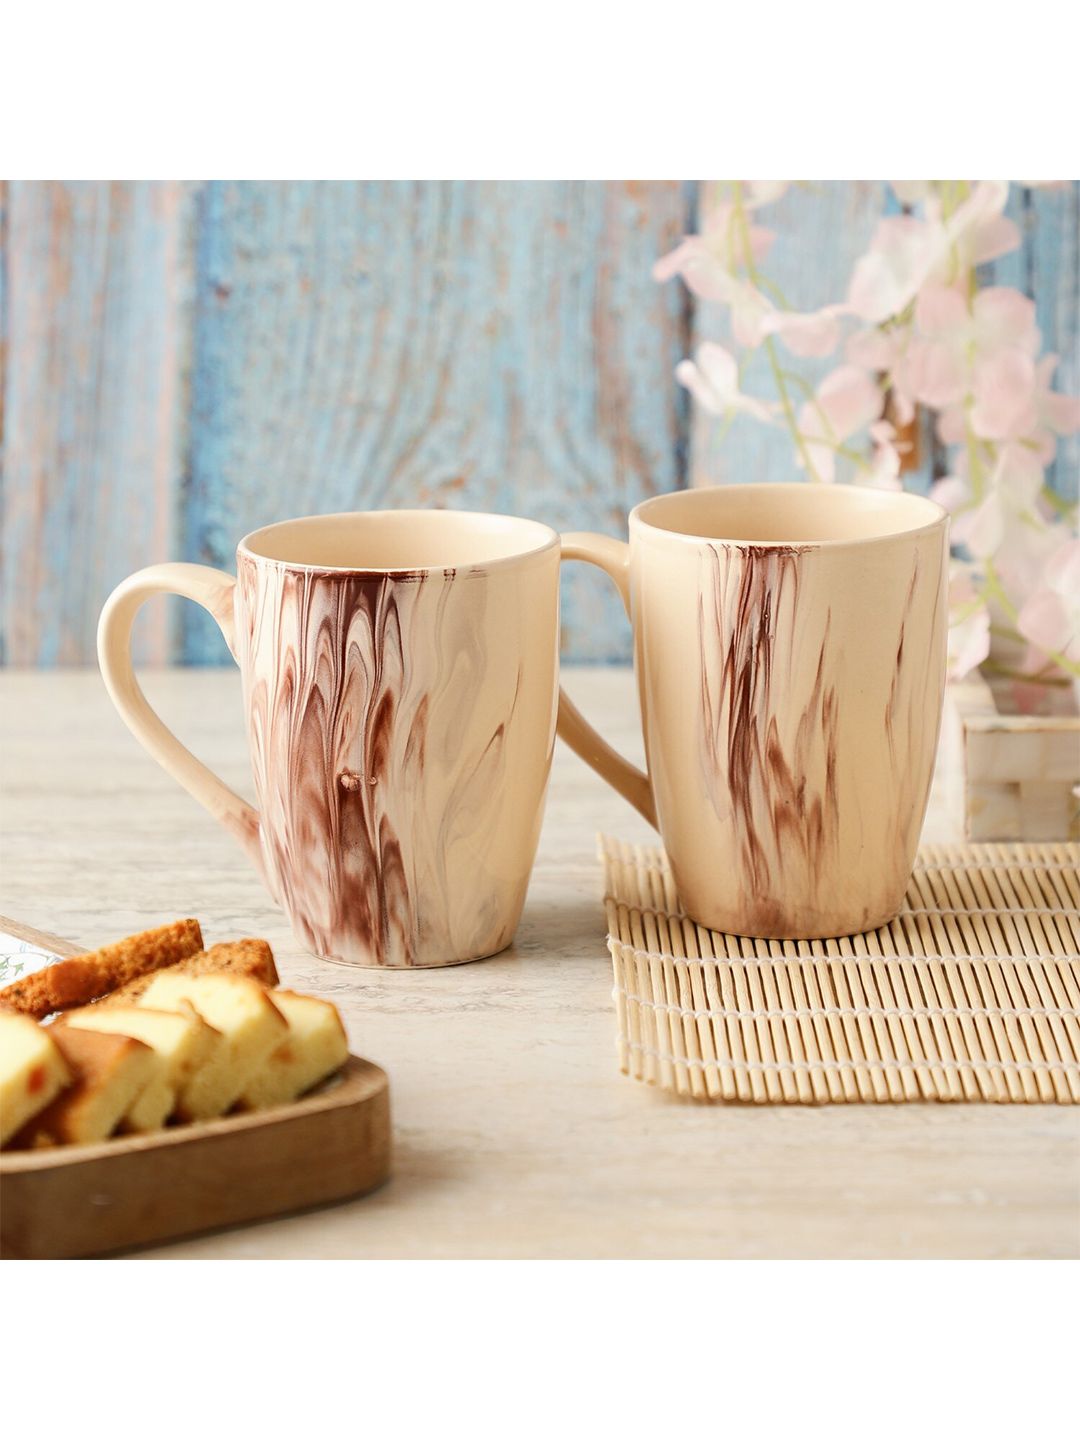 The Decor Mart White & Brown Printed Ceramic Glossy Mugs Set of Cups and Mugs Price in India